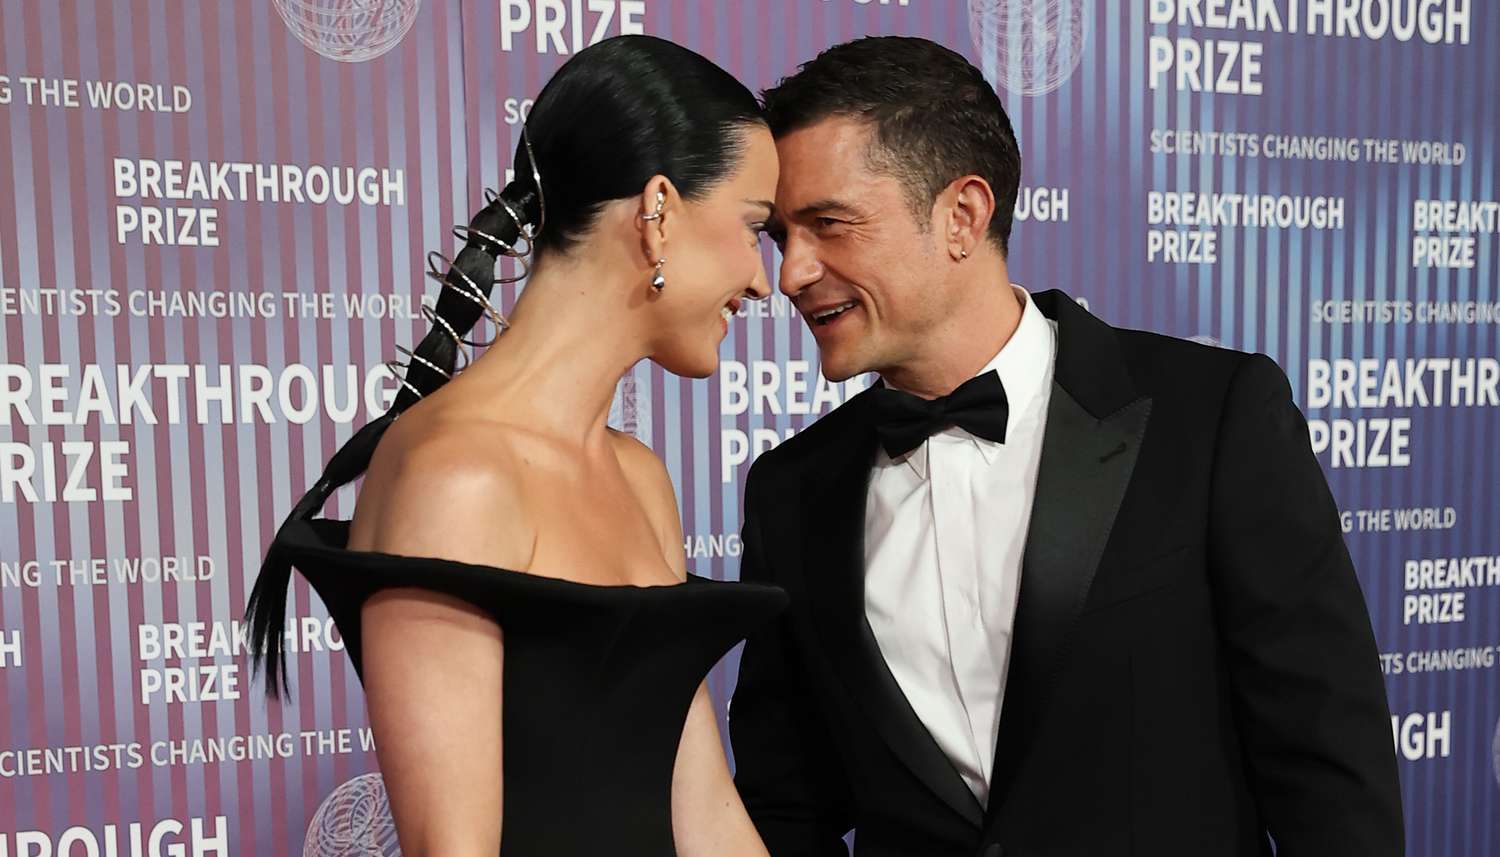 Katy Perry and Orlando Bloom First Bonded Over In-N-Out